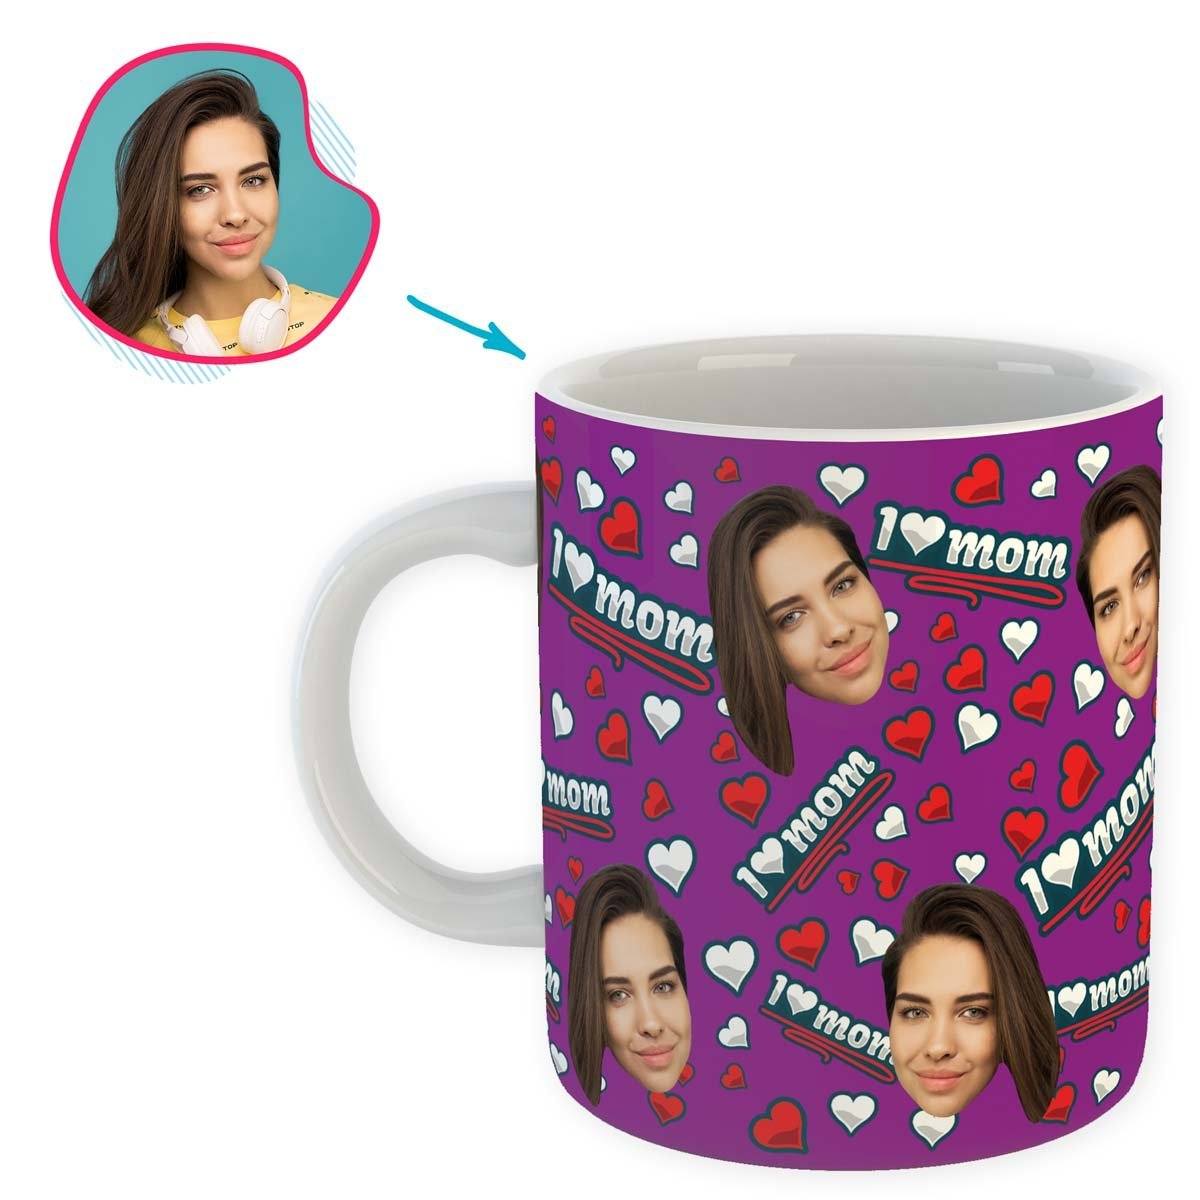 purple Love Mom mug personalized with photo of face printed on it